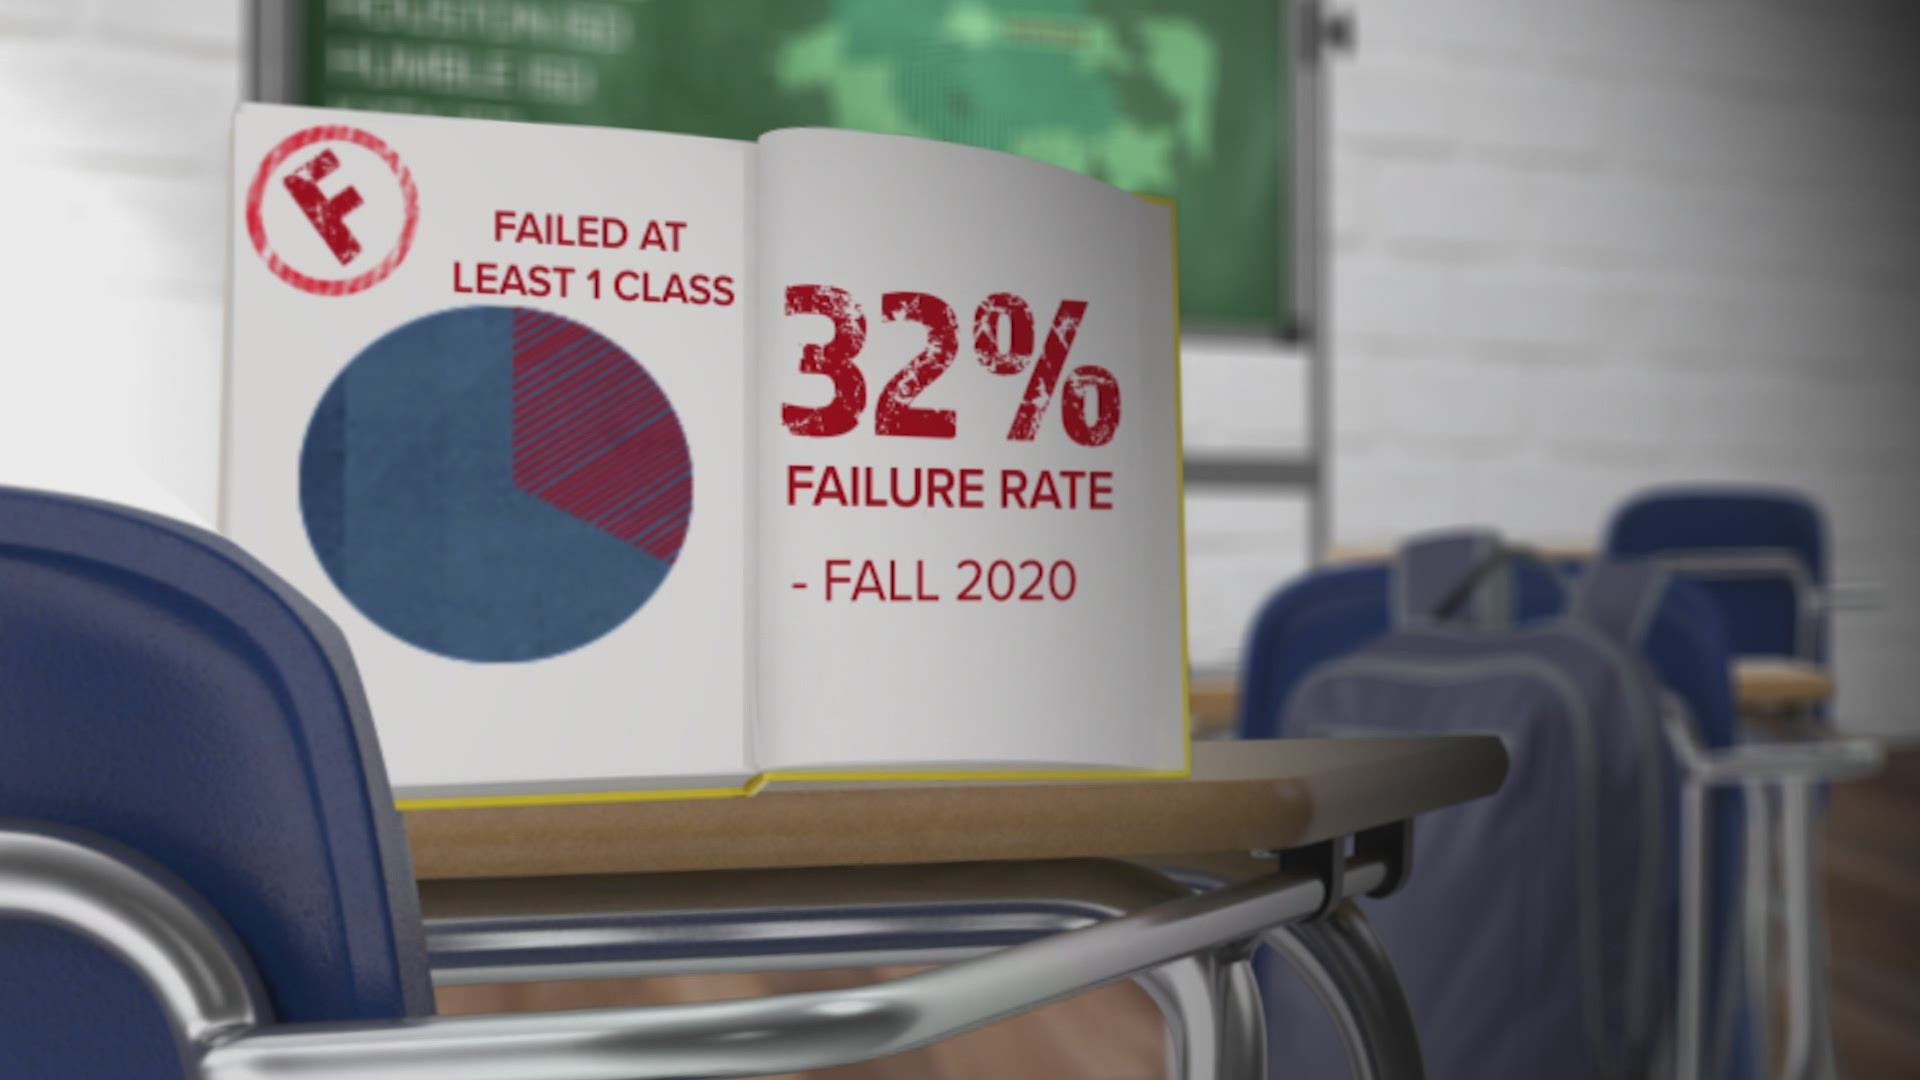 School failure rates at some Houston-area districts doubled or even tripled during the COVID-19 pandemic, a KHOU 11 analysis of school data has found.